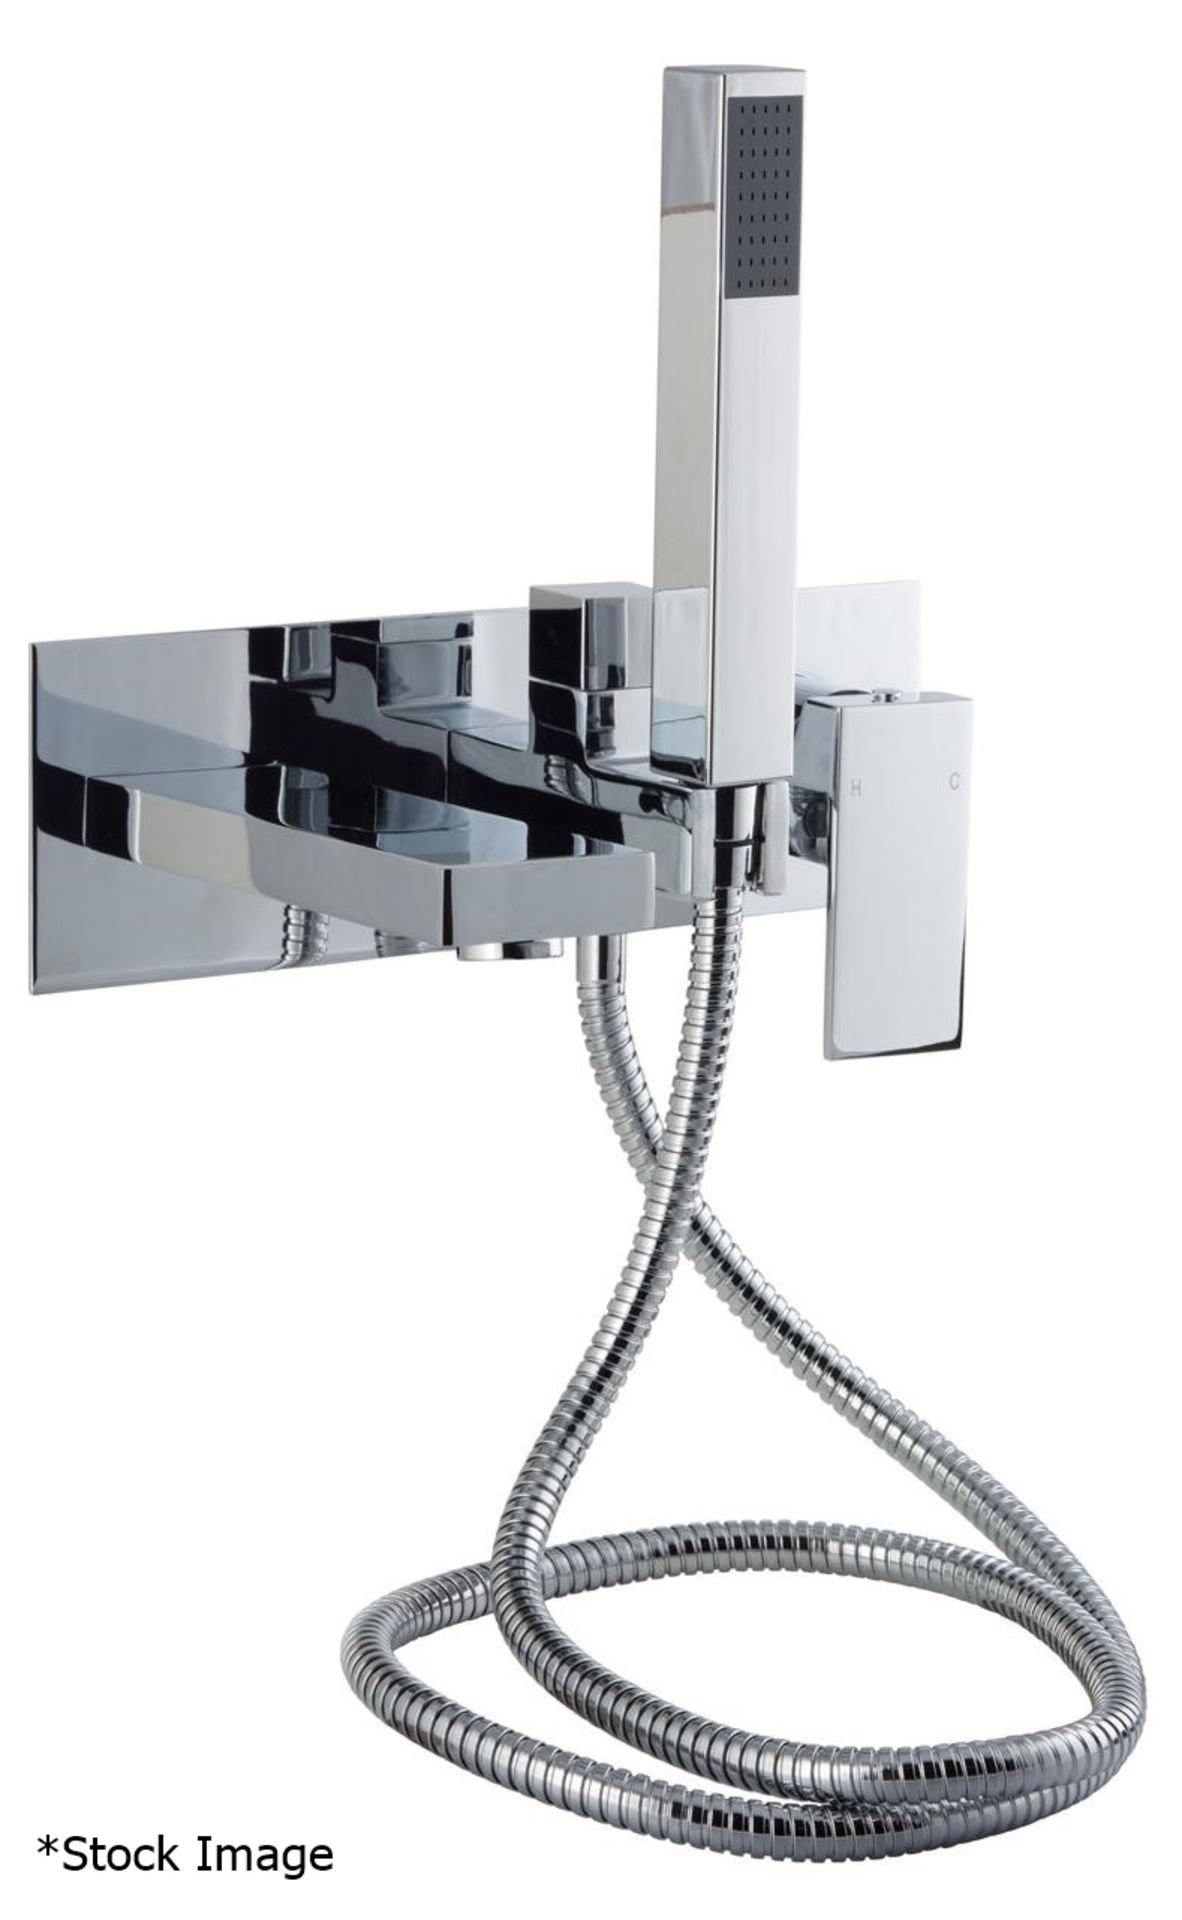 1 x Cassellie 'Form' Wall Mounted Bath Shower Mixer Tap - Ref: FRM006 - New & Boxed Stock - RRP £